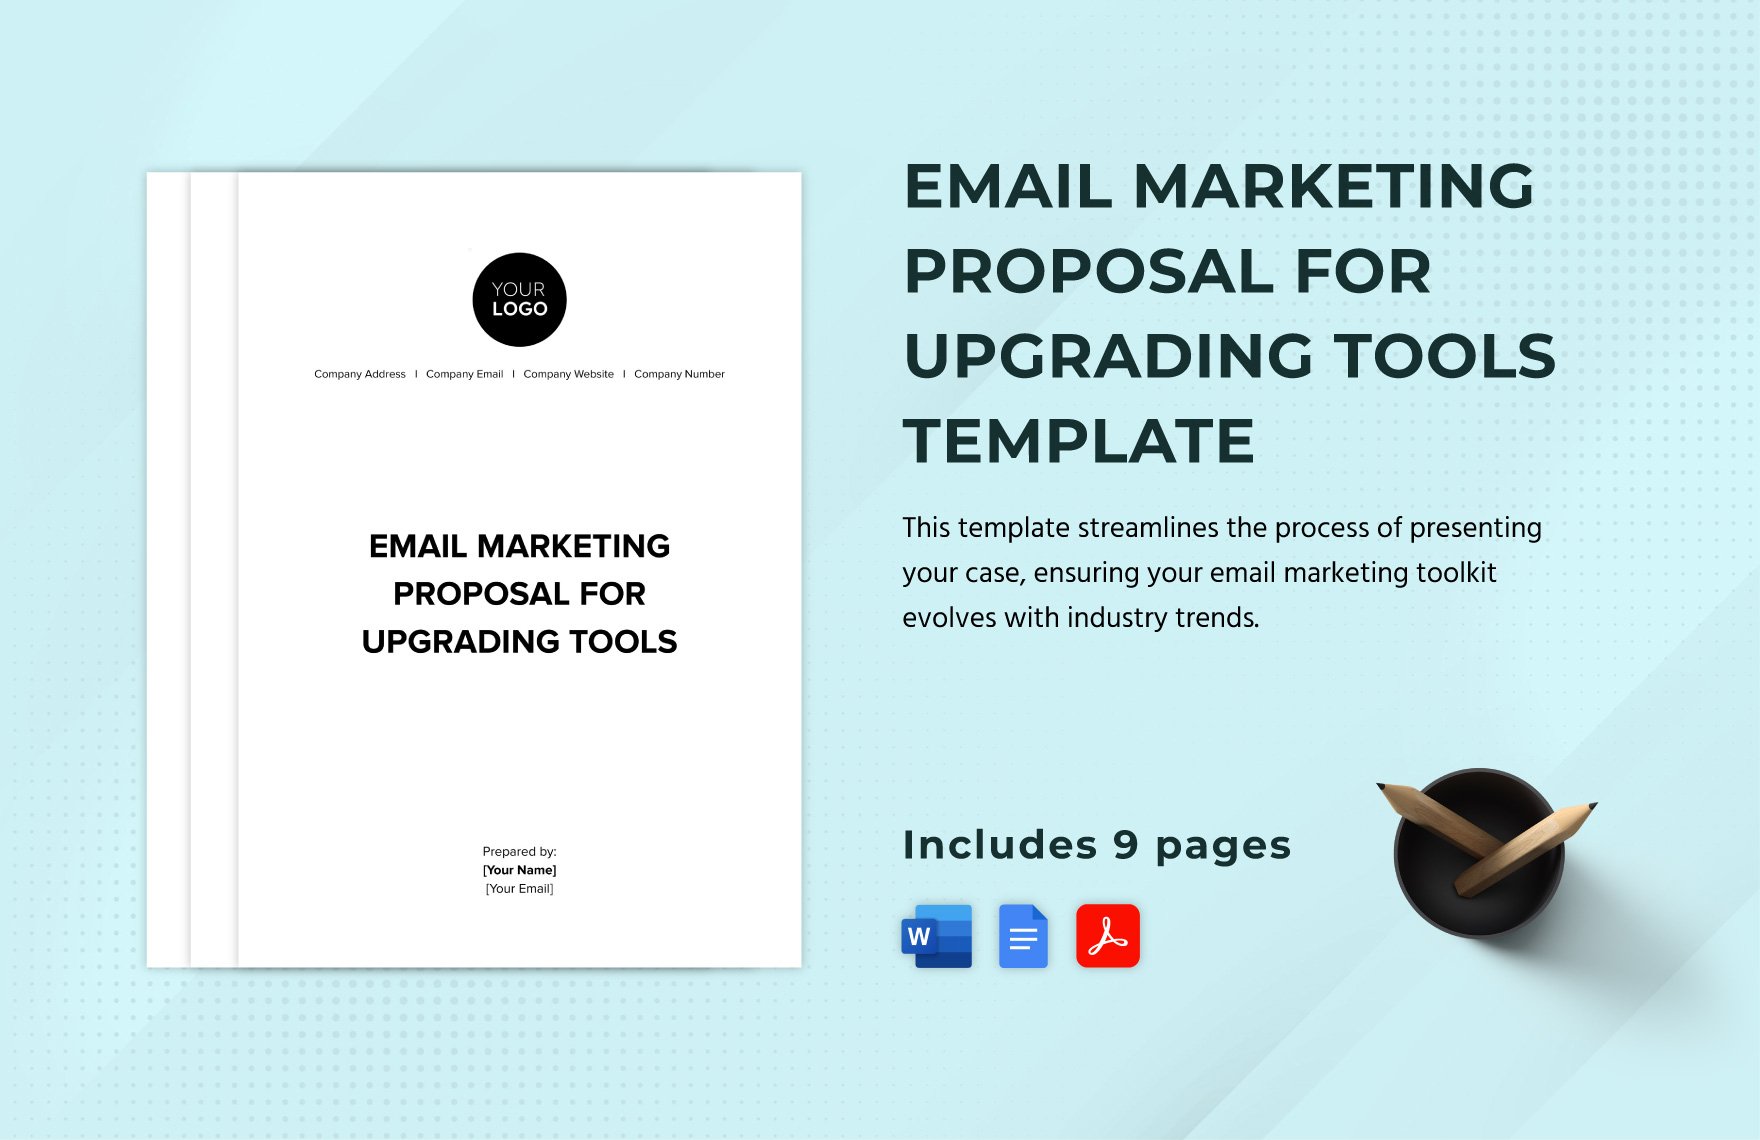 Email Marketing Proposal for Upgrading Tools Template